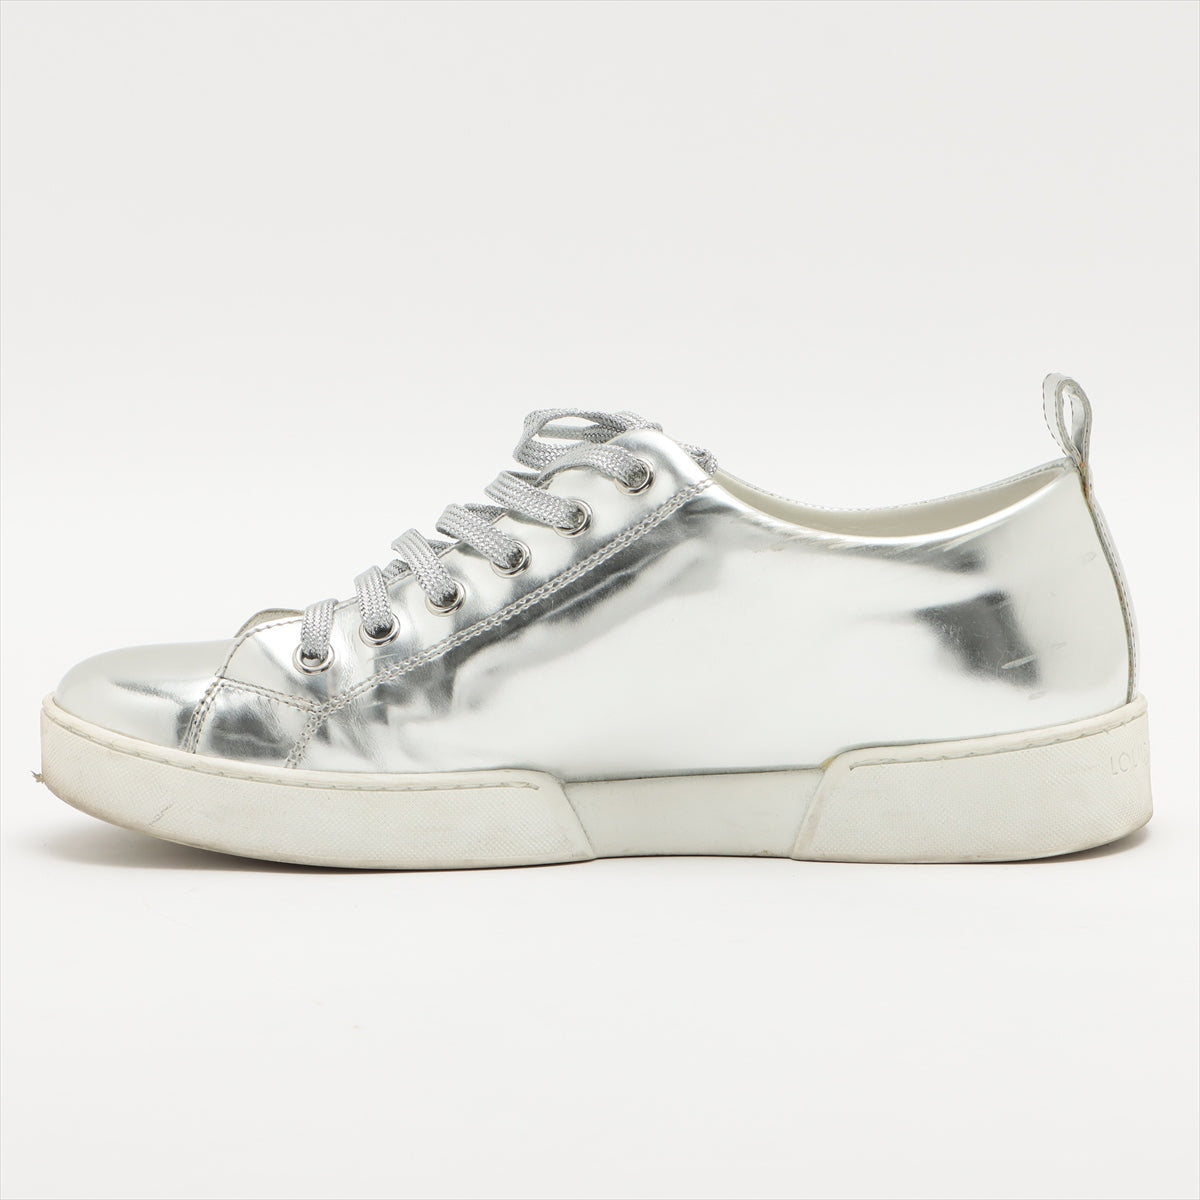 Louis Vuitton Leather Sneakers 35 Ladies' Silver CL1106 Is there dirt on the insole